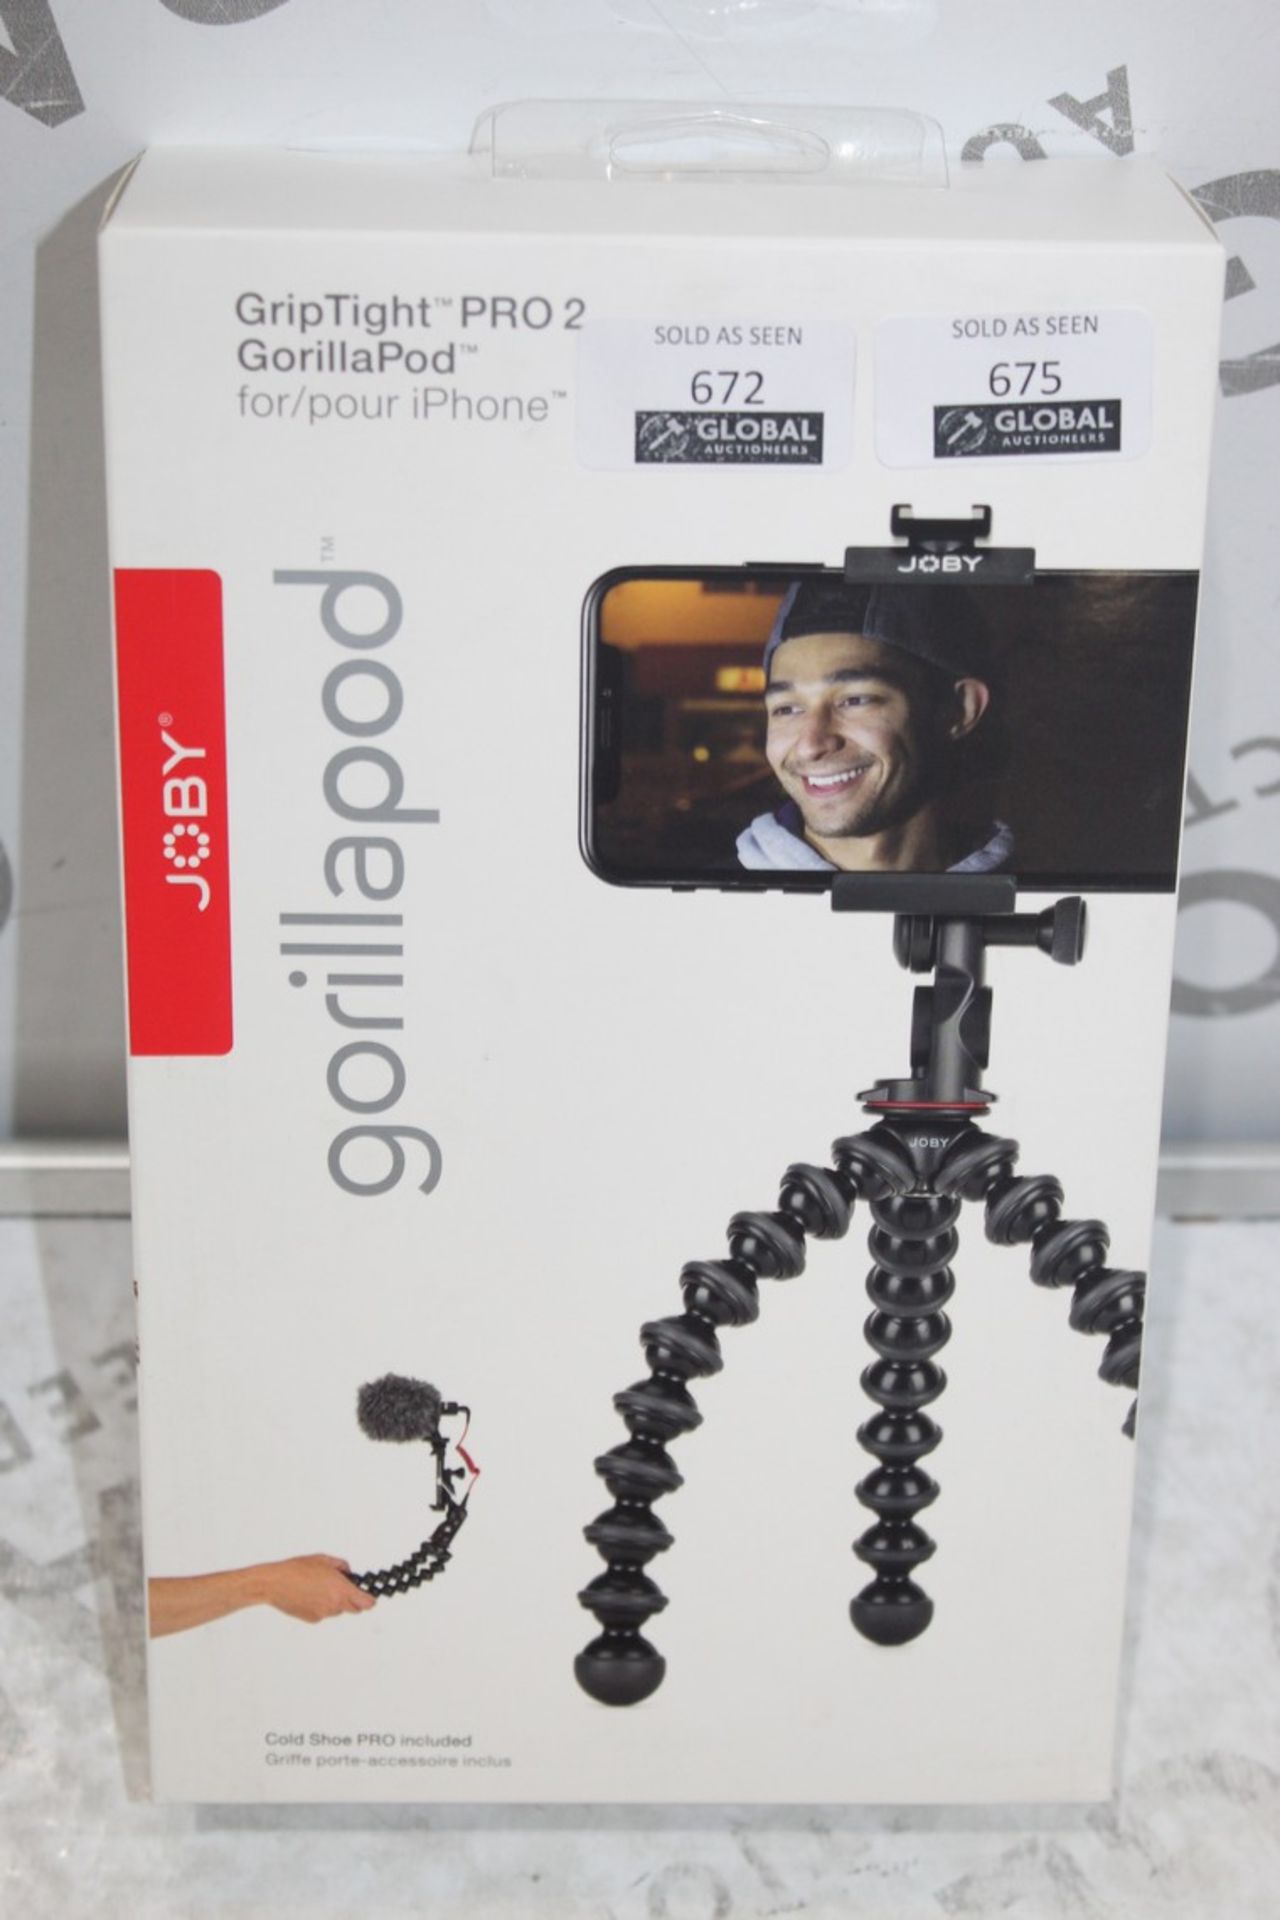 Boxed Joby Gorilla Pod Grip Tight Pro 2 Iphone Tripods RRP £70 Public Viewings And Appraisals